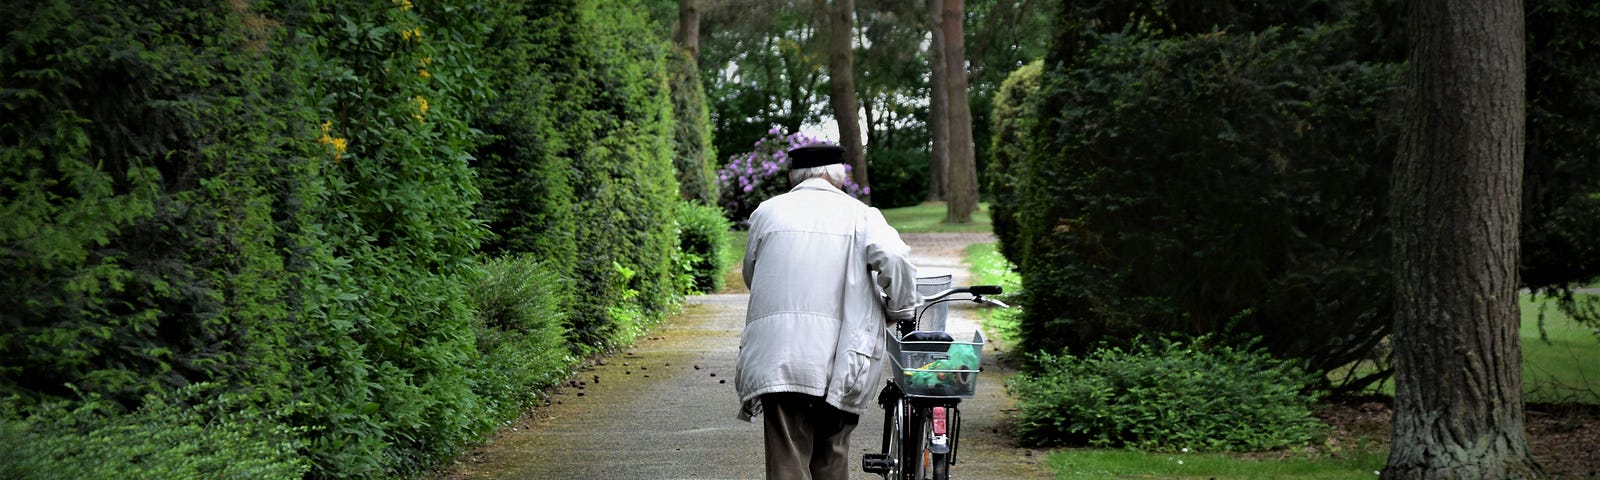 Old man with black cap and white coat on walkway with bicycle